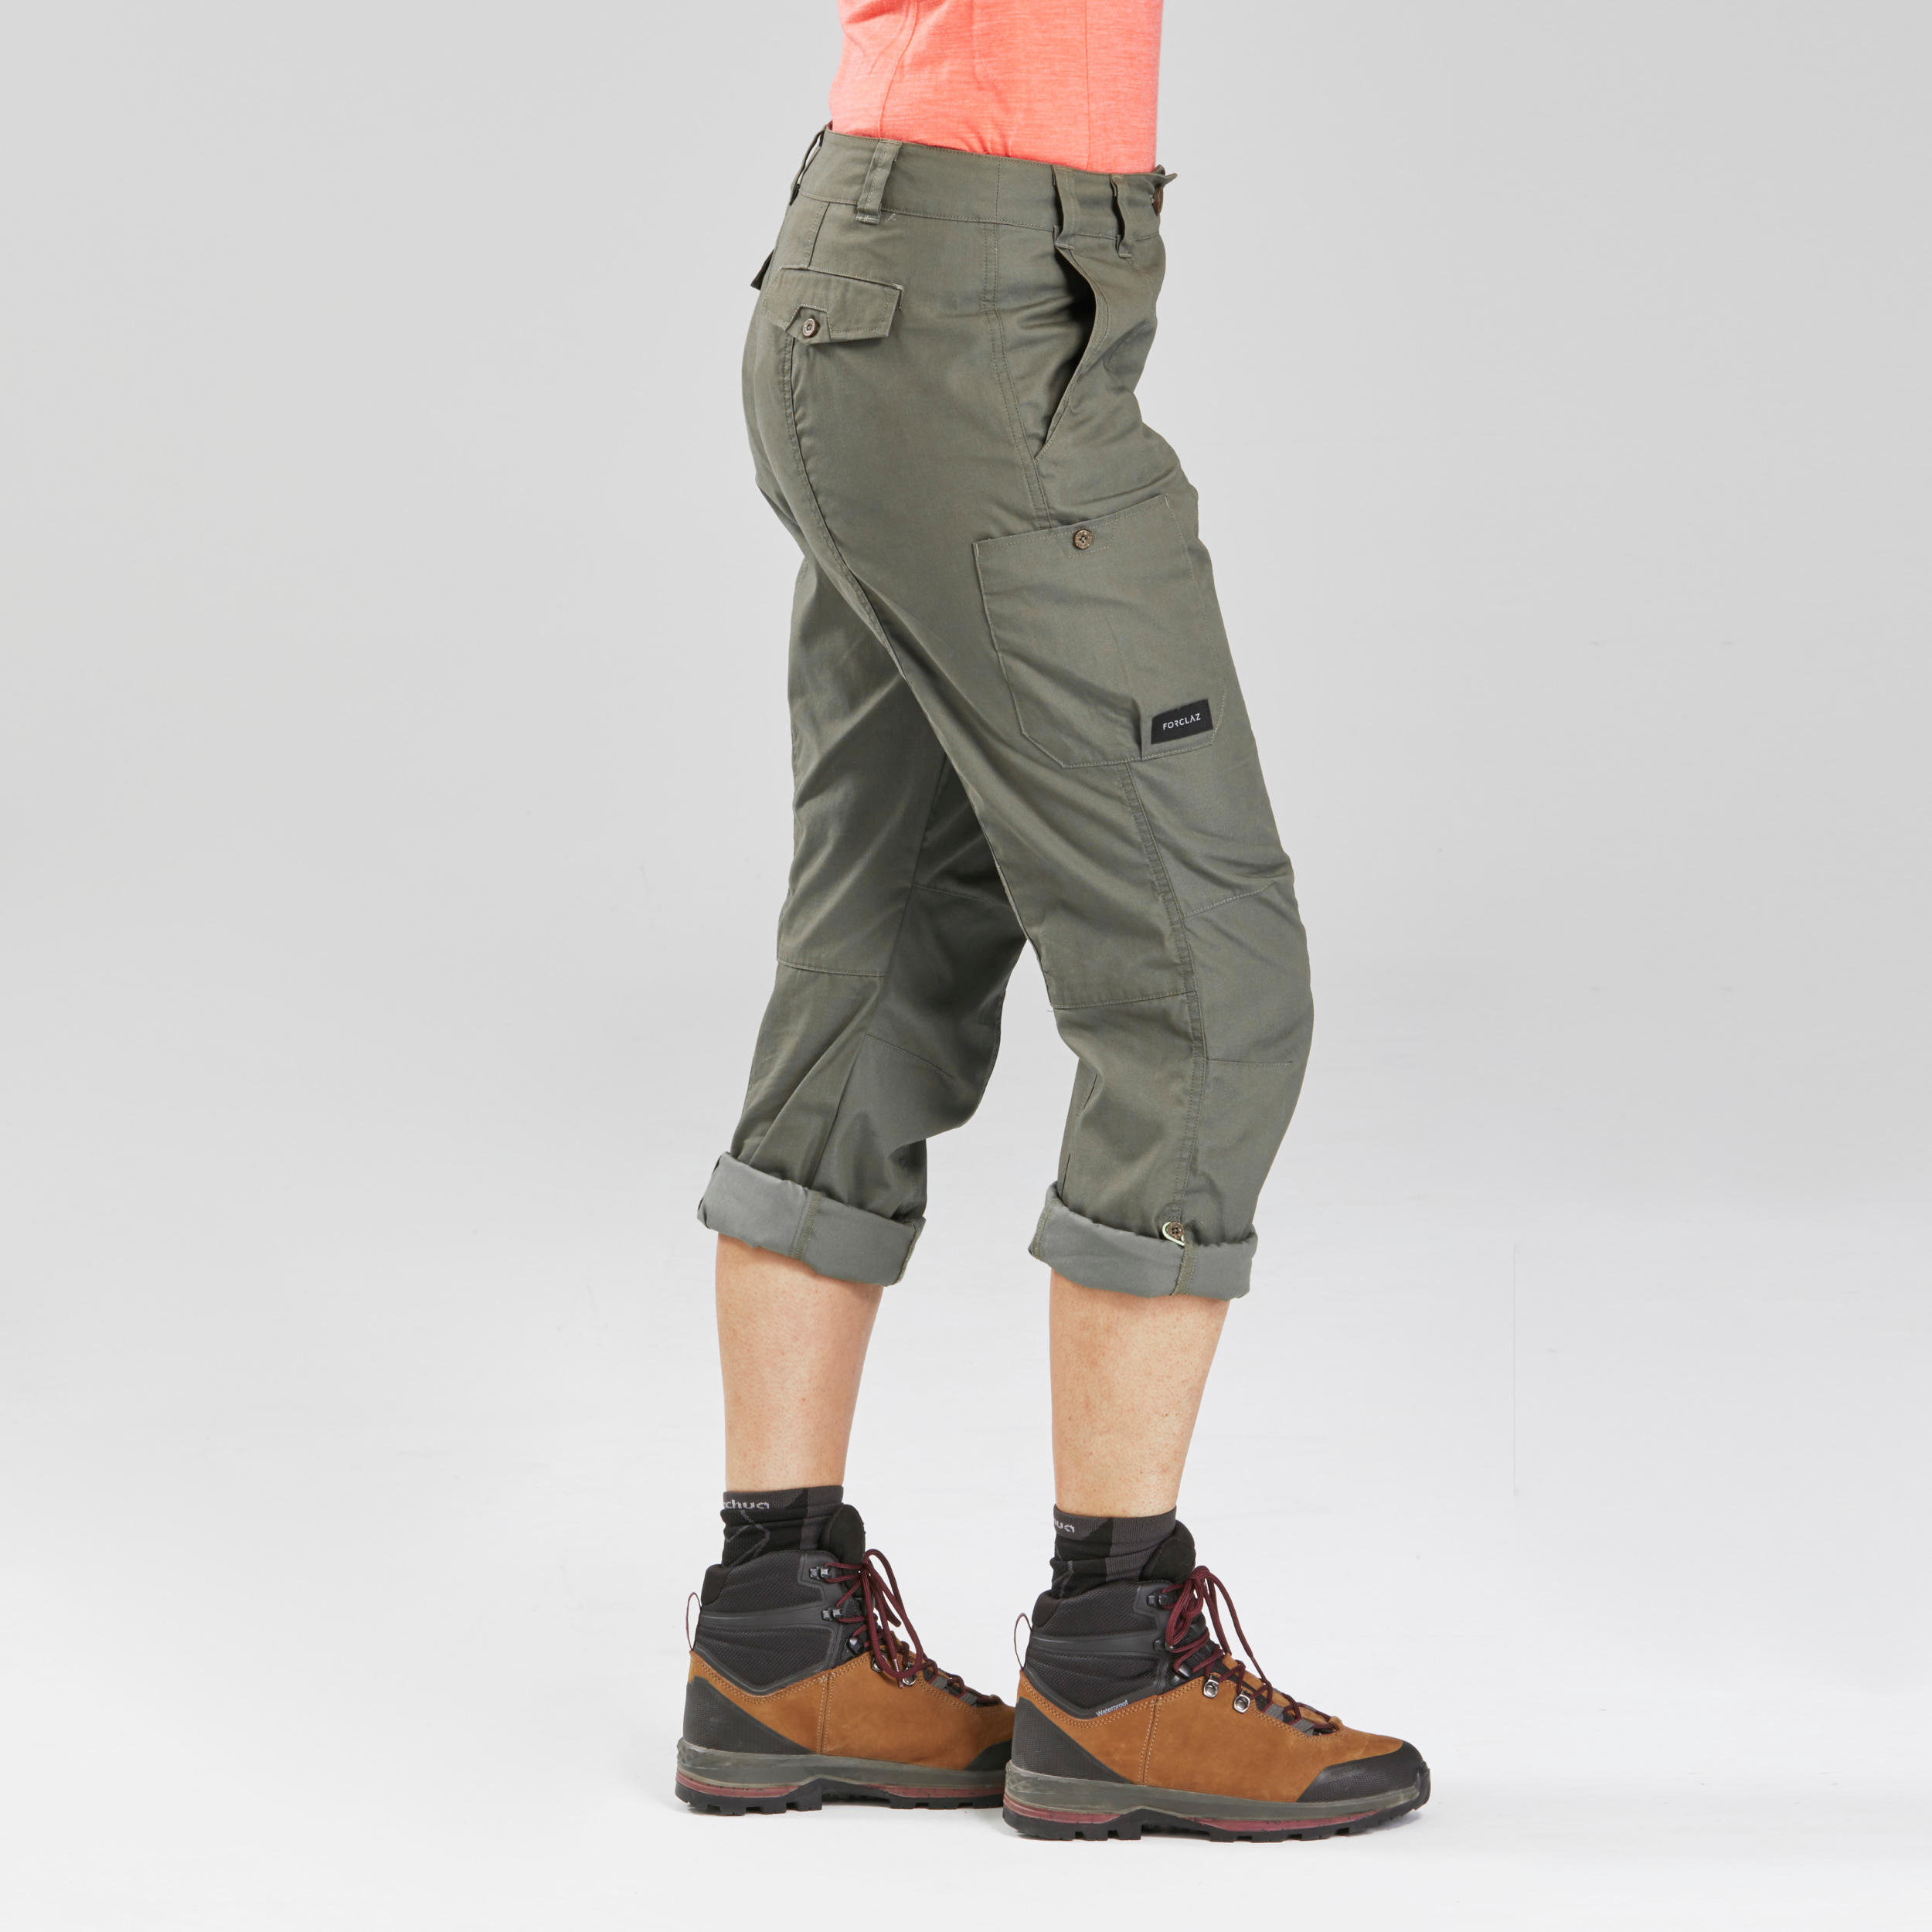 RQYYD Cargo Pants Women Casual Loose High Waisted Straight Leg Baggy Pants  Trousers Lightweight Outdoor Travel Pants with Pockets(Army Green,XL) -  Walmart.com